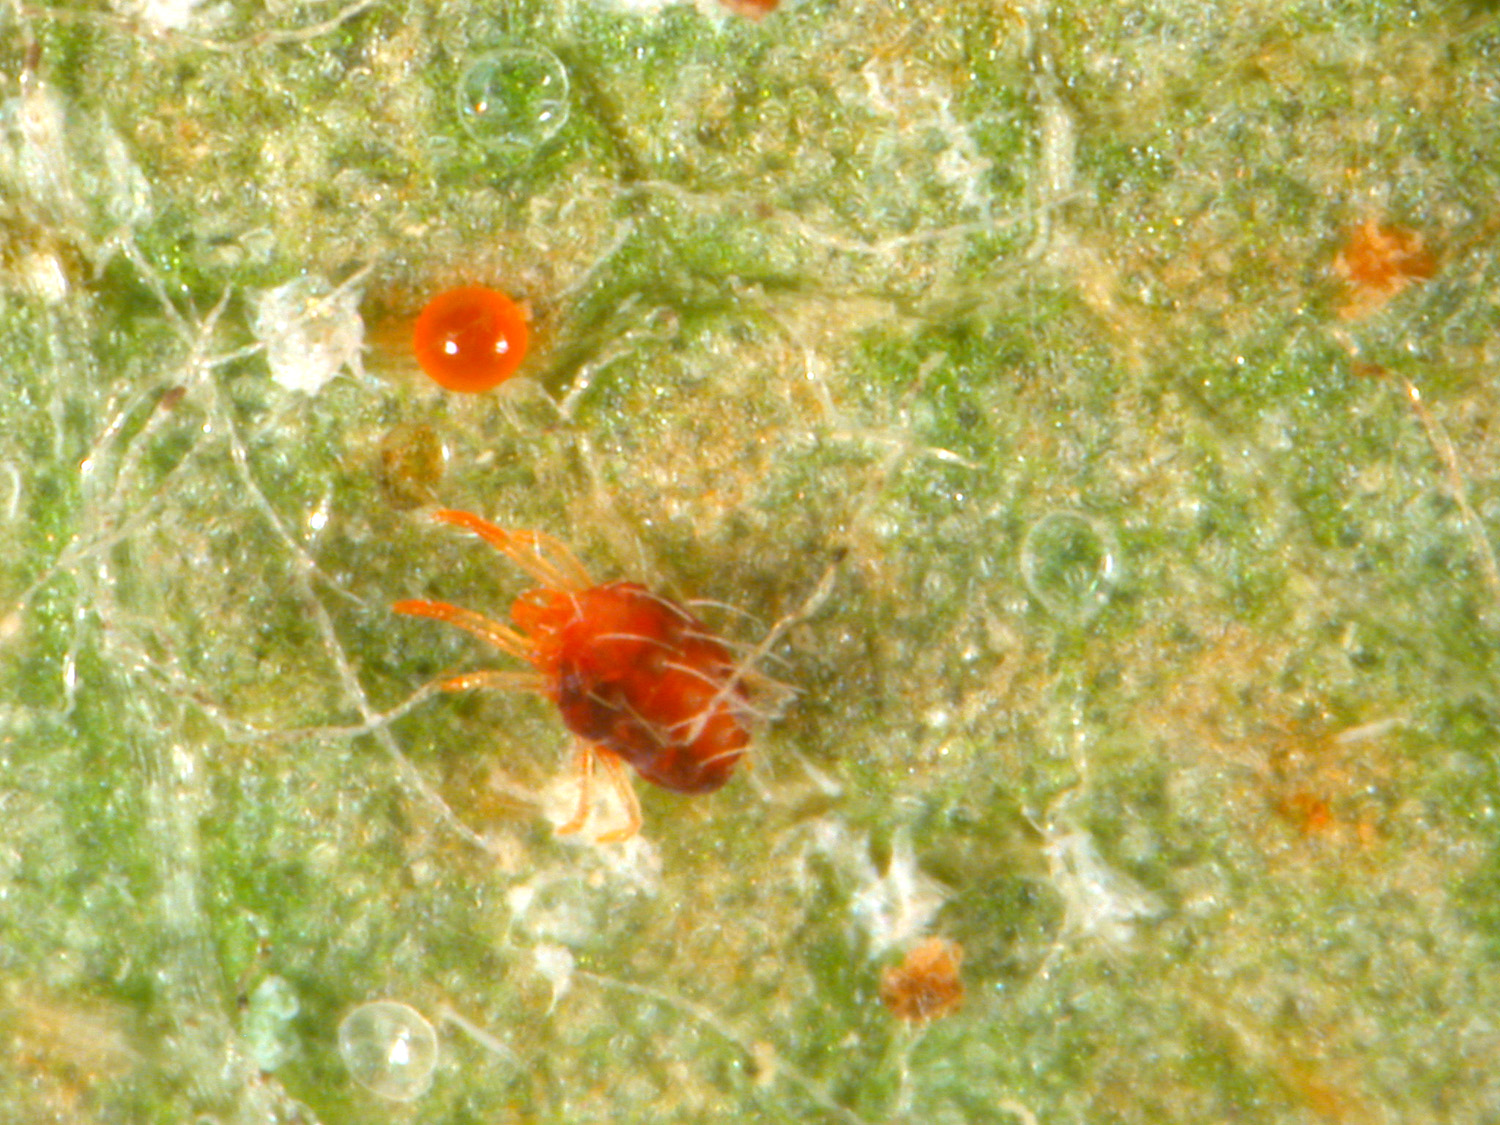 Fig. 2. Female European red mite and summer egg. (Photo credit: Purdue University)